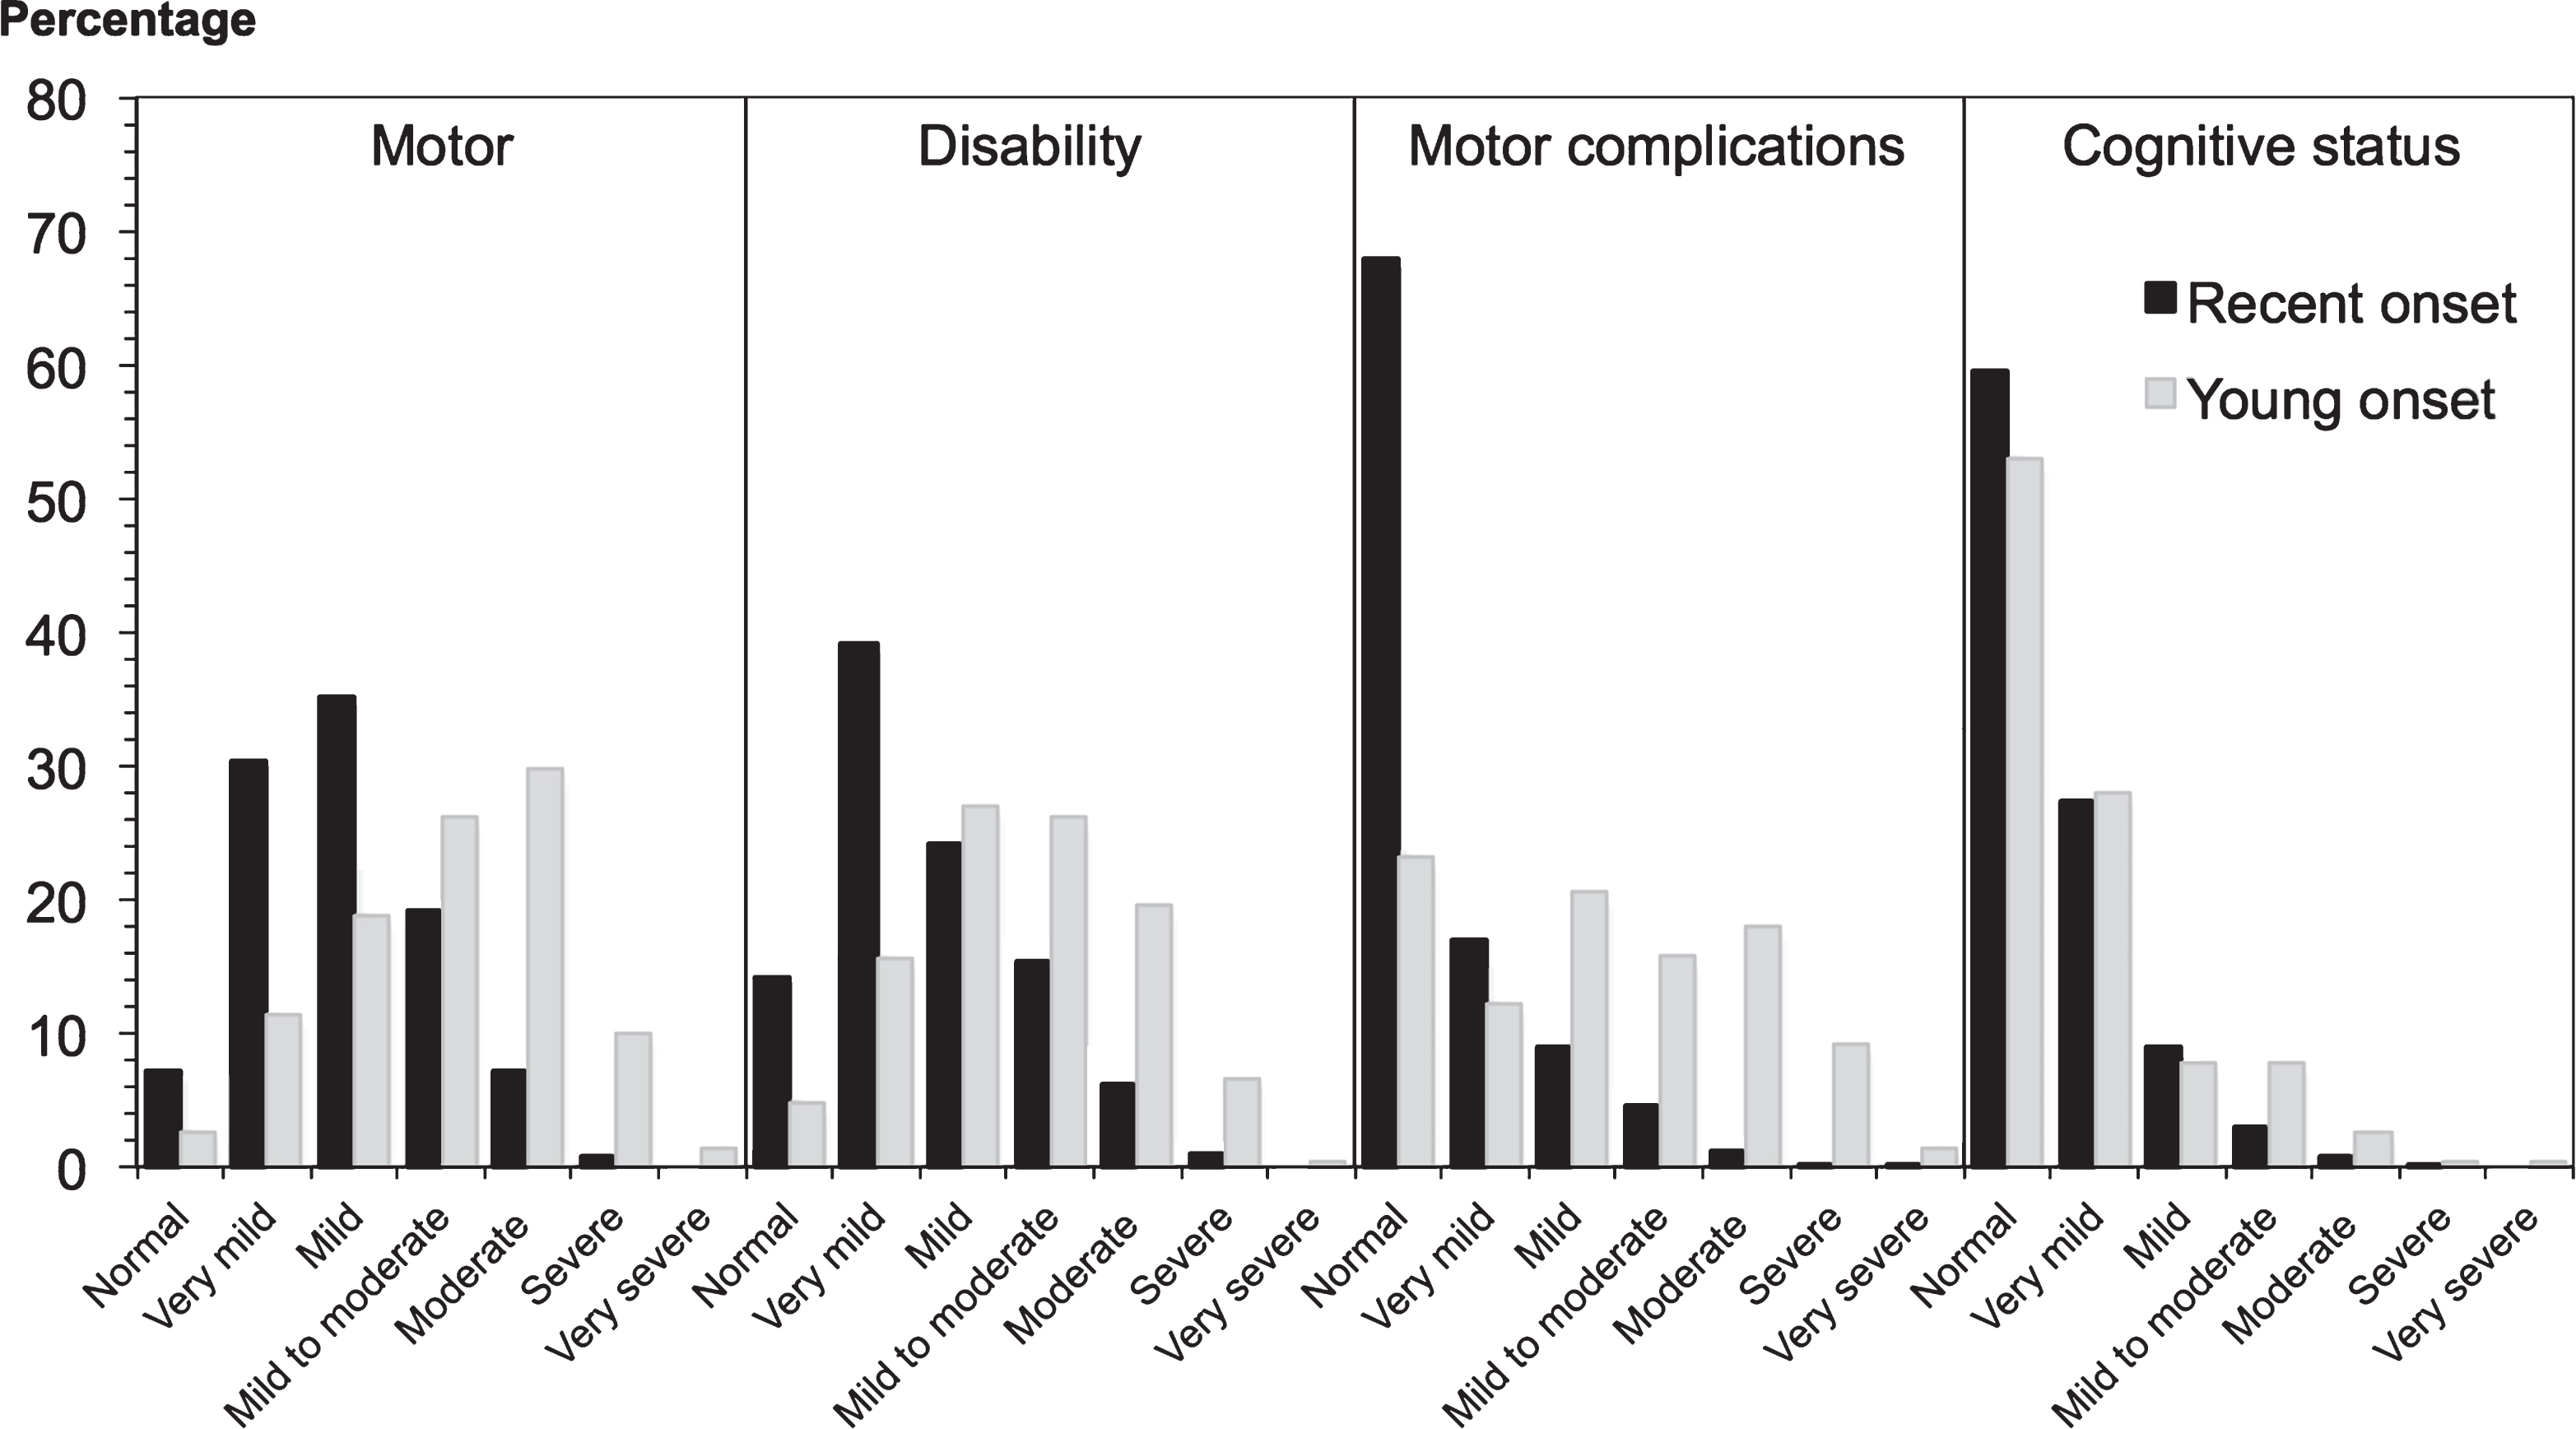 Clinical impression of severity index scores in 2247 PD patients. Recent onset cases had a significantly shorter disease duration than young onset cases, explaining their milder motor features and disability, while the cognitive pattern was more equal, given the greater risk of cognitive impairment with age.